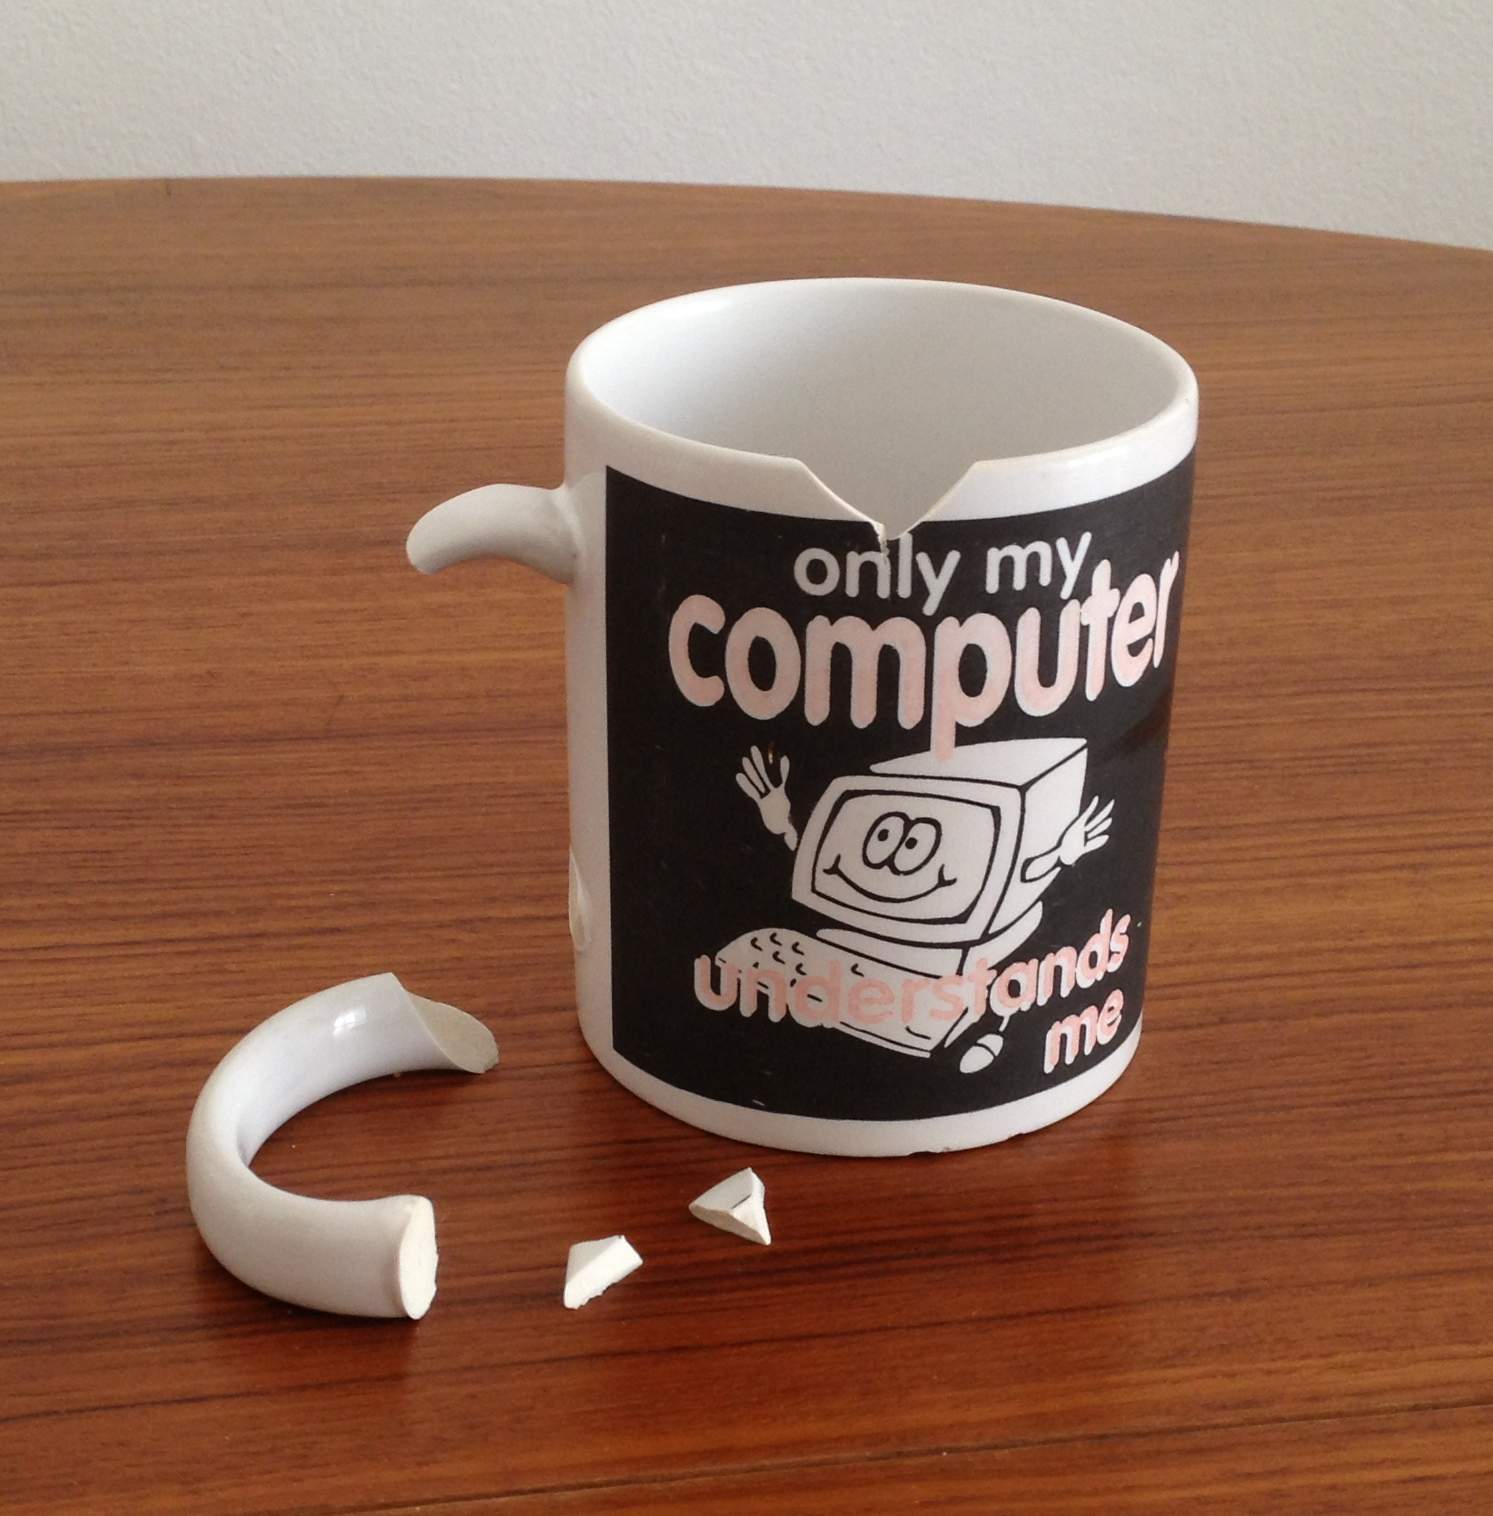 mug with chip in rim and broken handle, image on mug says "only my computer understands me"